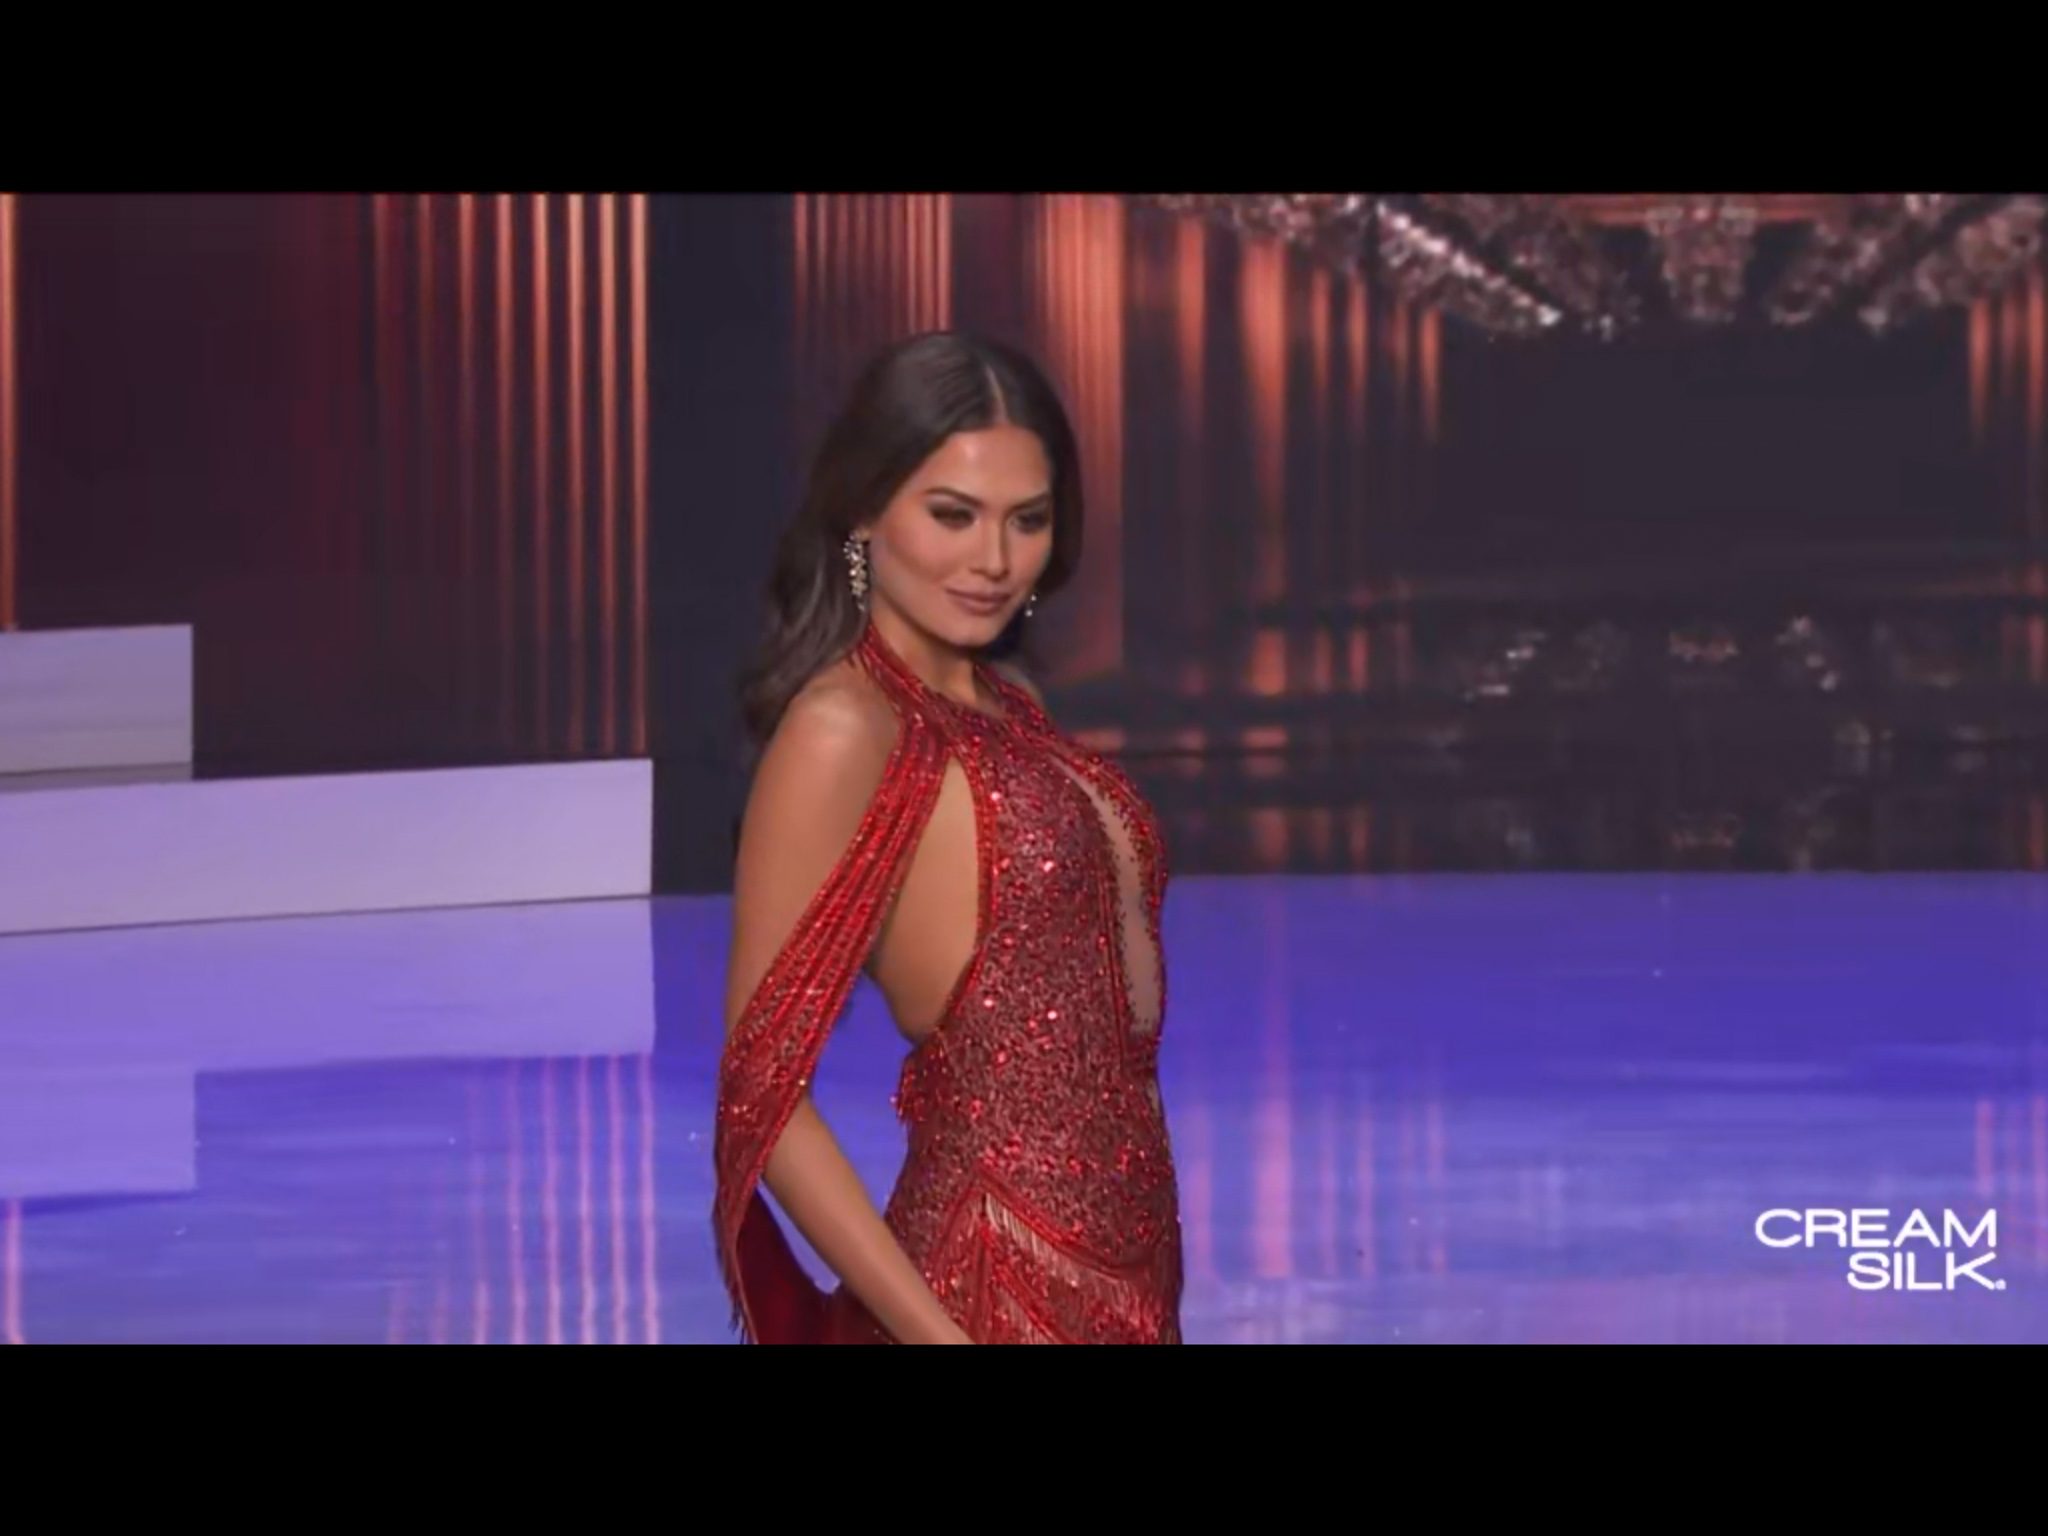 IN PHOTOS: The Miss Universe 2020 long gown competition